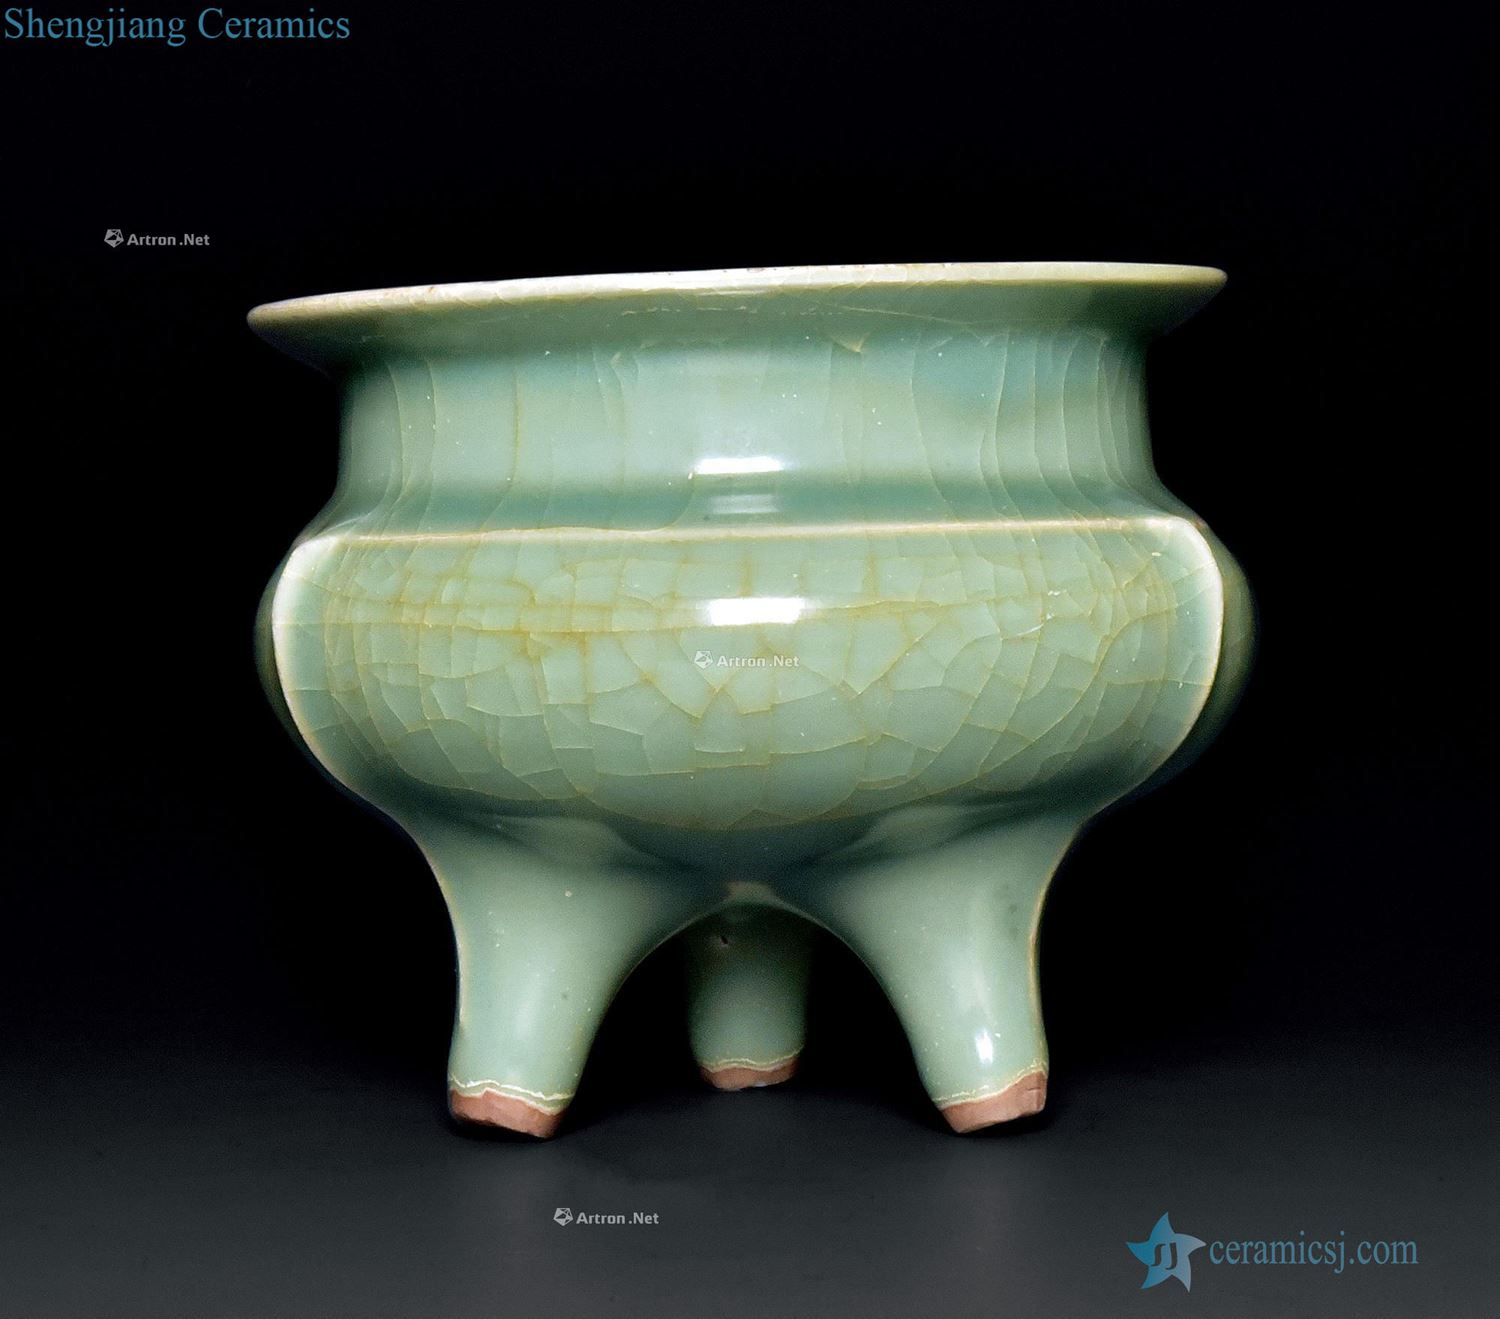 The southern song dynasty Longquan celadon plum green glaze by furnace